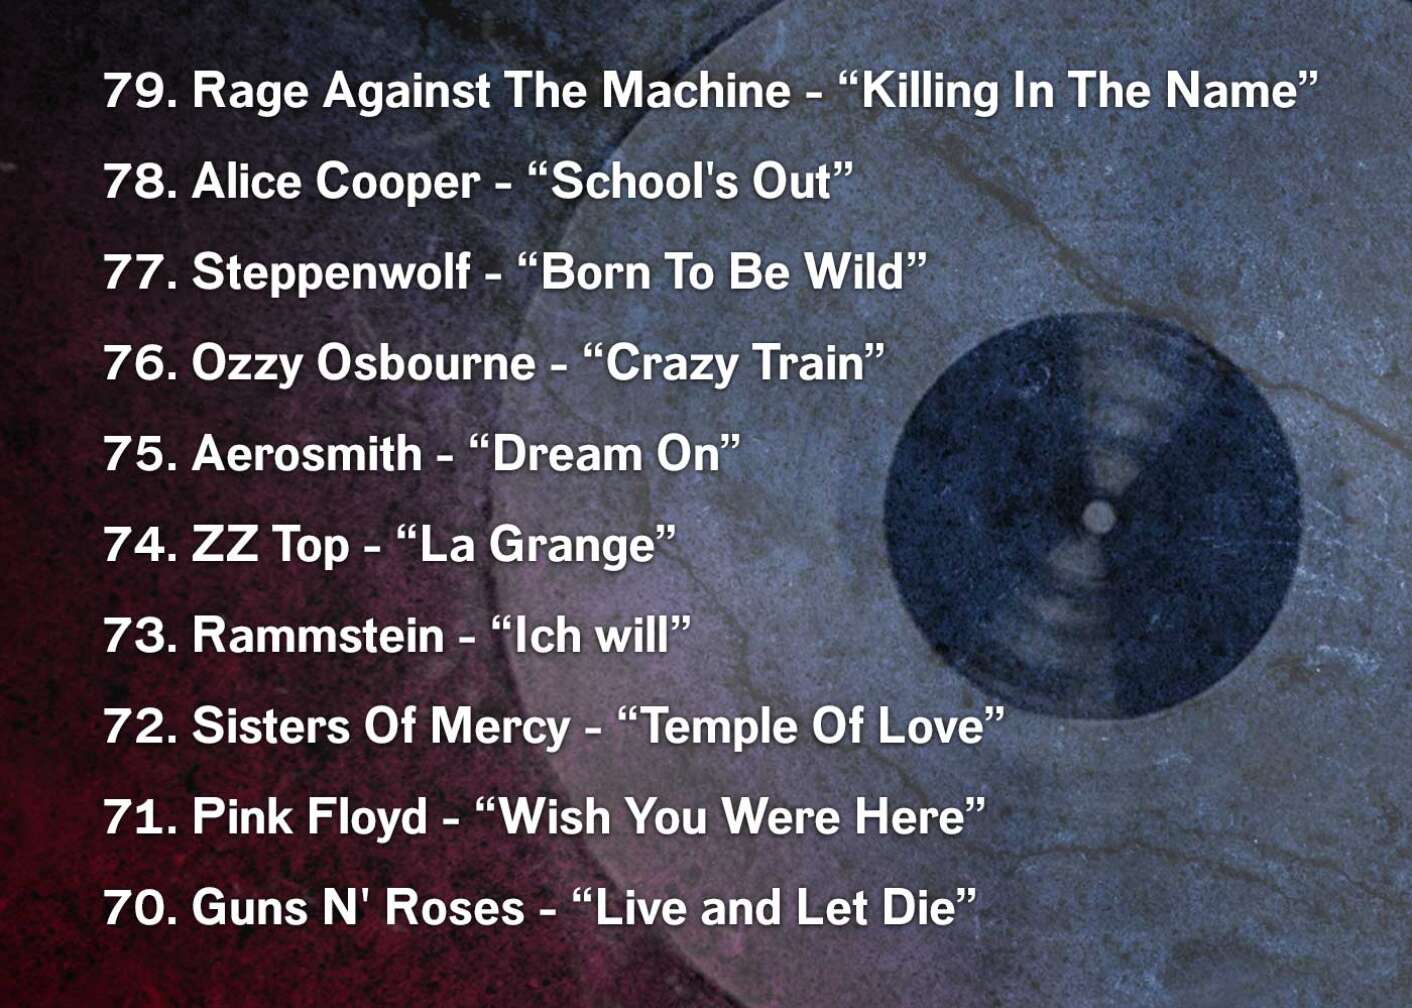 79. Rage Against The Machine - “Killing In The Name” 78. Alice Cooper - “School's Out” 77. Steppenwolf - “Born To Be Wild” 76. Ozzy Osbourne - “Crazy Train” 75. Aerosmith - “Dream On” 74. ZZ Top - “La Grange” 73. Rammstein - “Ich will” 72. Sisters Of Mercy - “Temple Of Love” 71. Pink Floyd - “Wish You Were Here” 70. Guns N' Roses - “Live and Let Die”